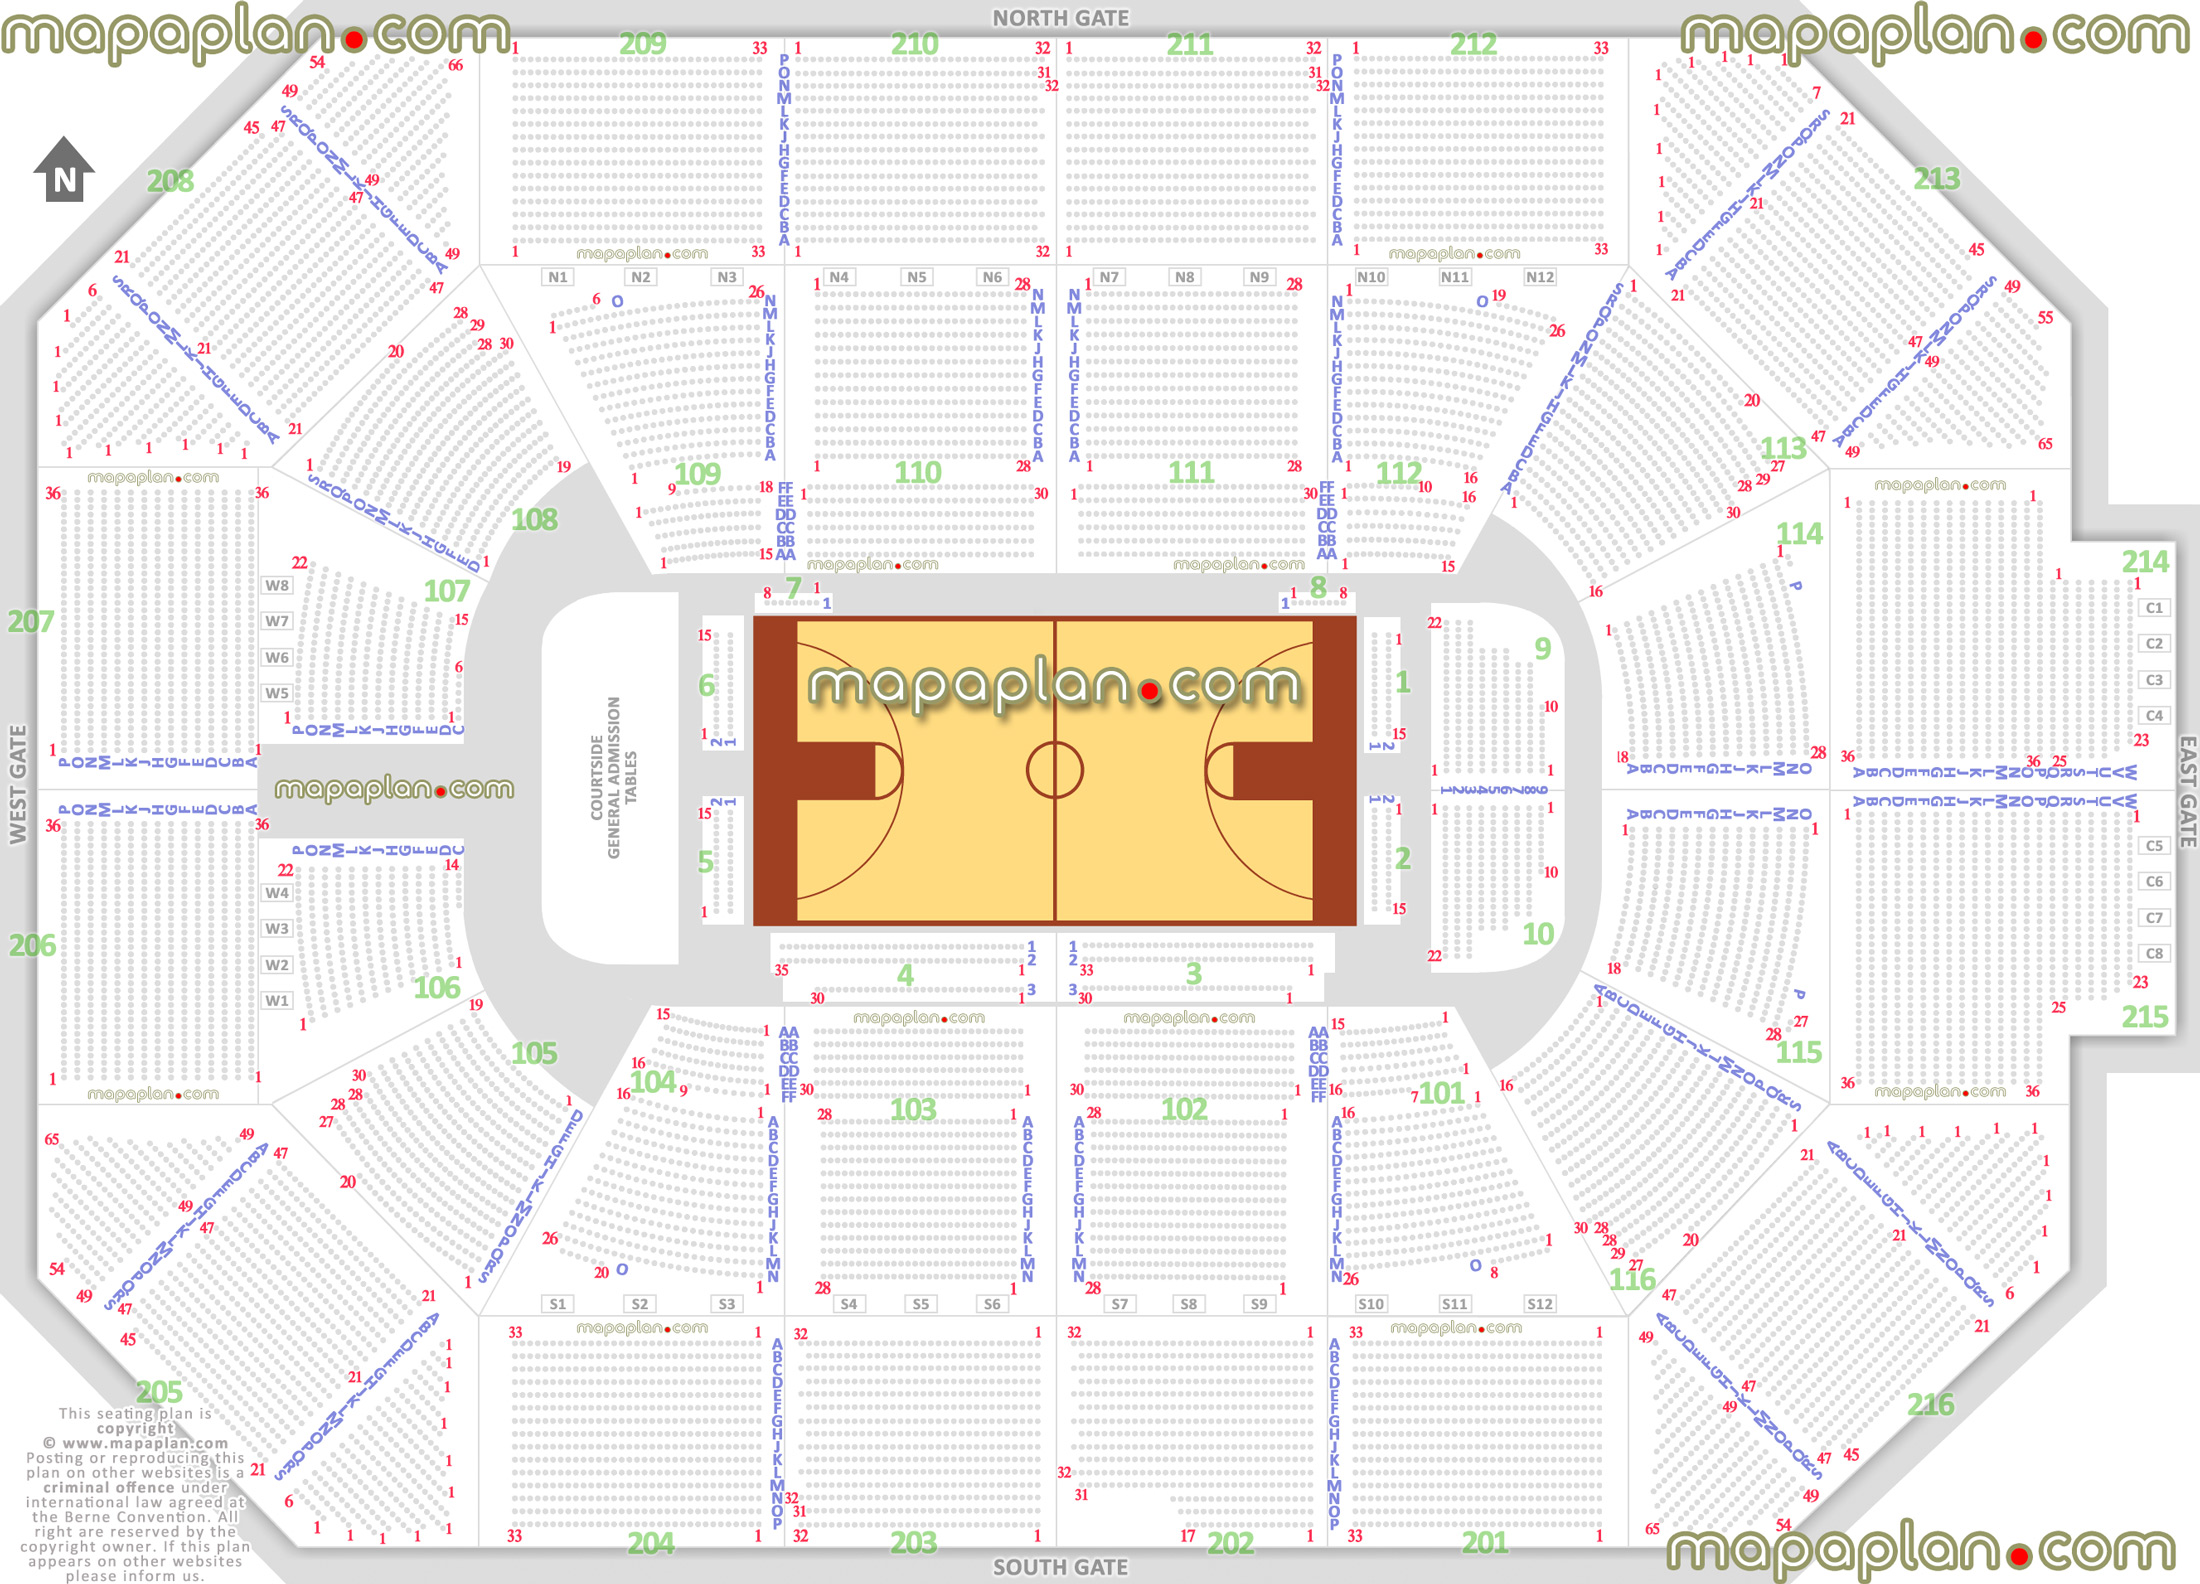 Allstate Arena Row Seating Chart